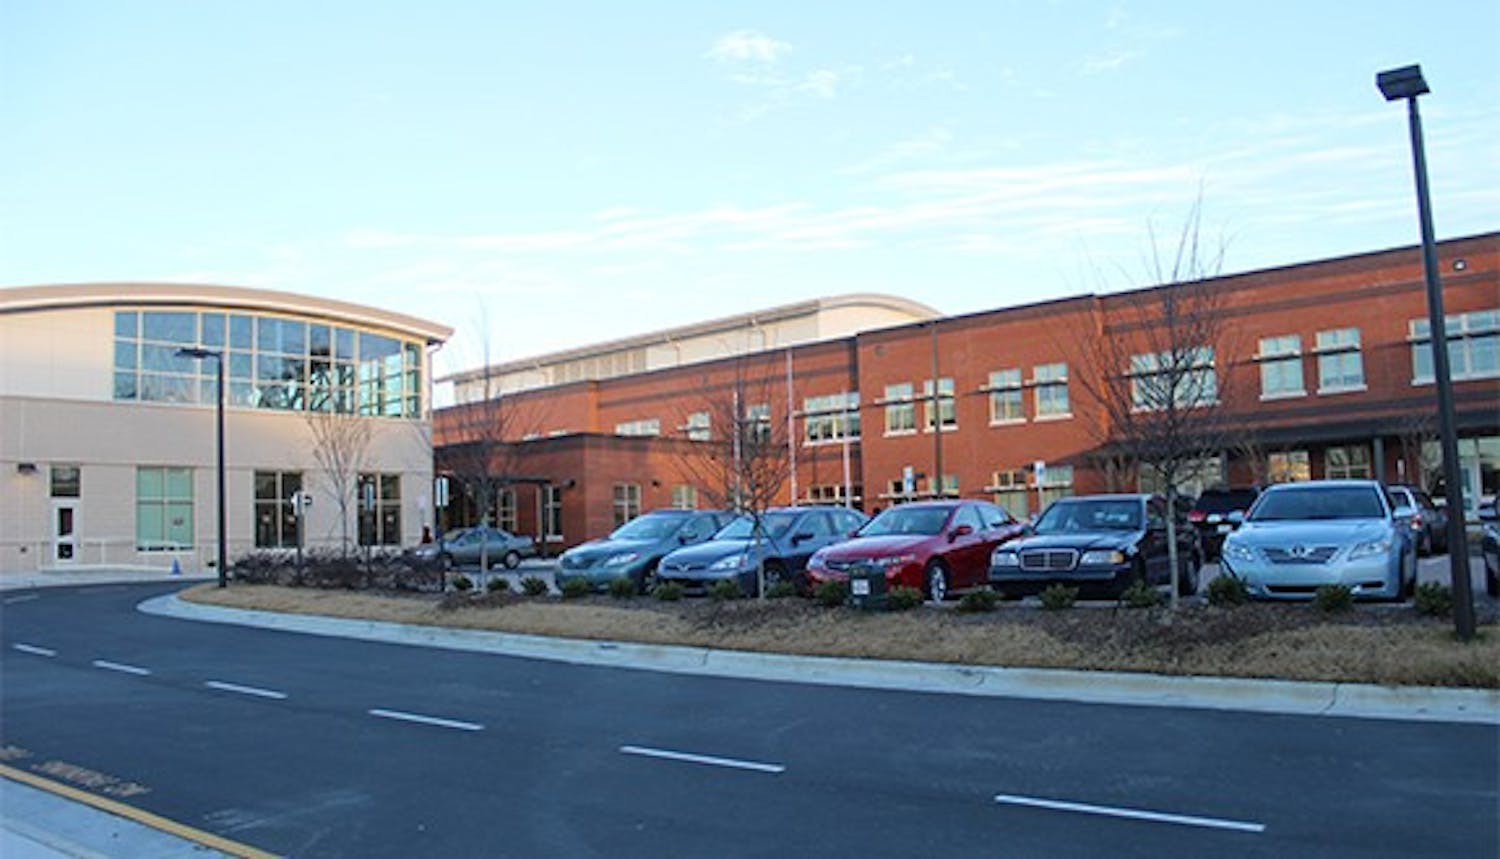 Moseley Architects is winning an award for their design of Northside Elementary School in Chapel Hill. Northside Elementary on Wednesday morning. North Carolina School Boards Association's Award for Excellence in Architectural Design